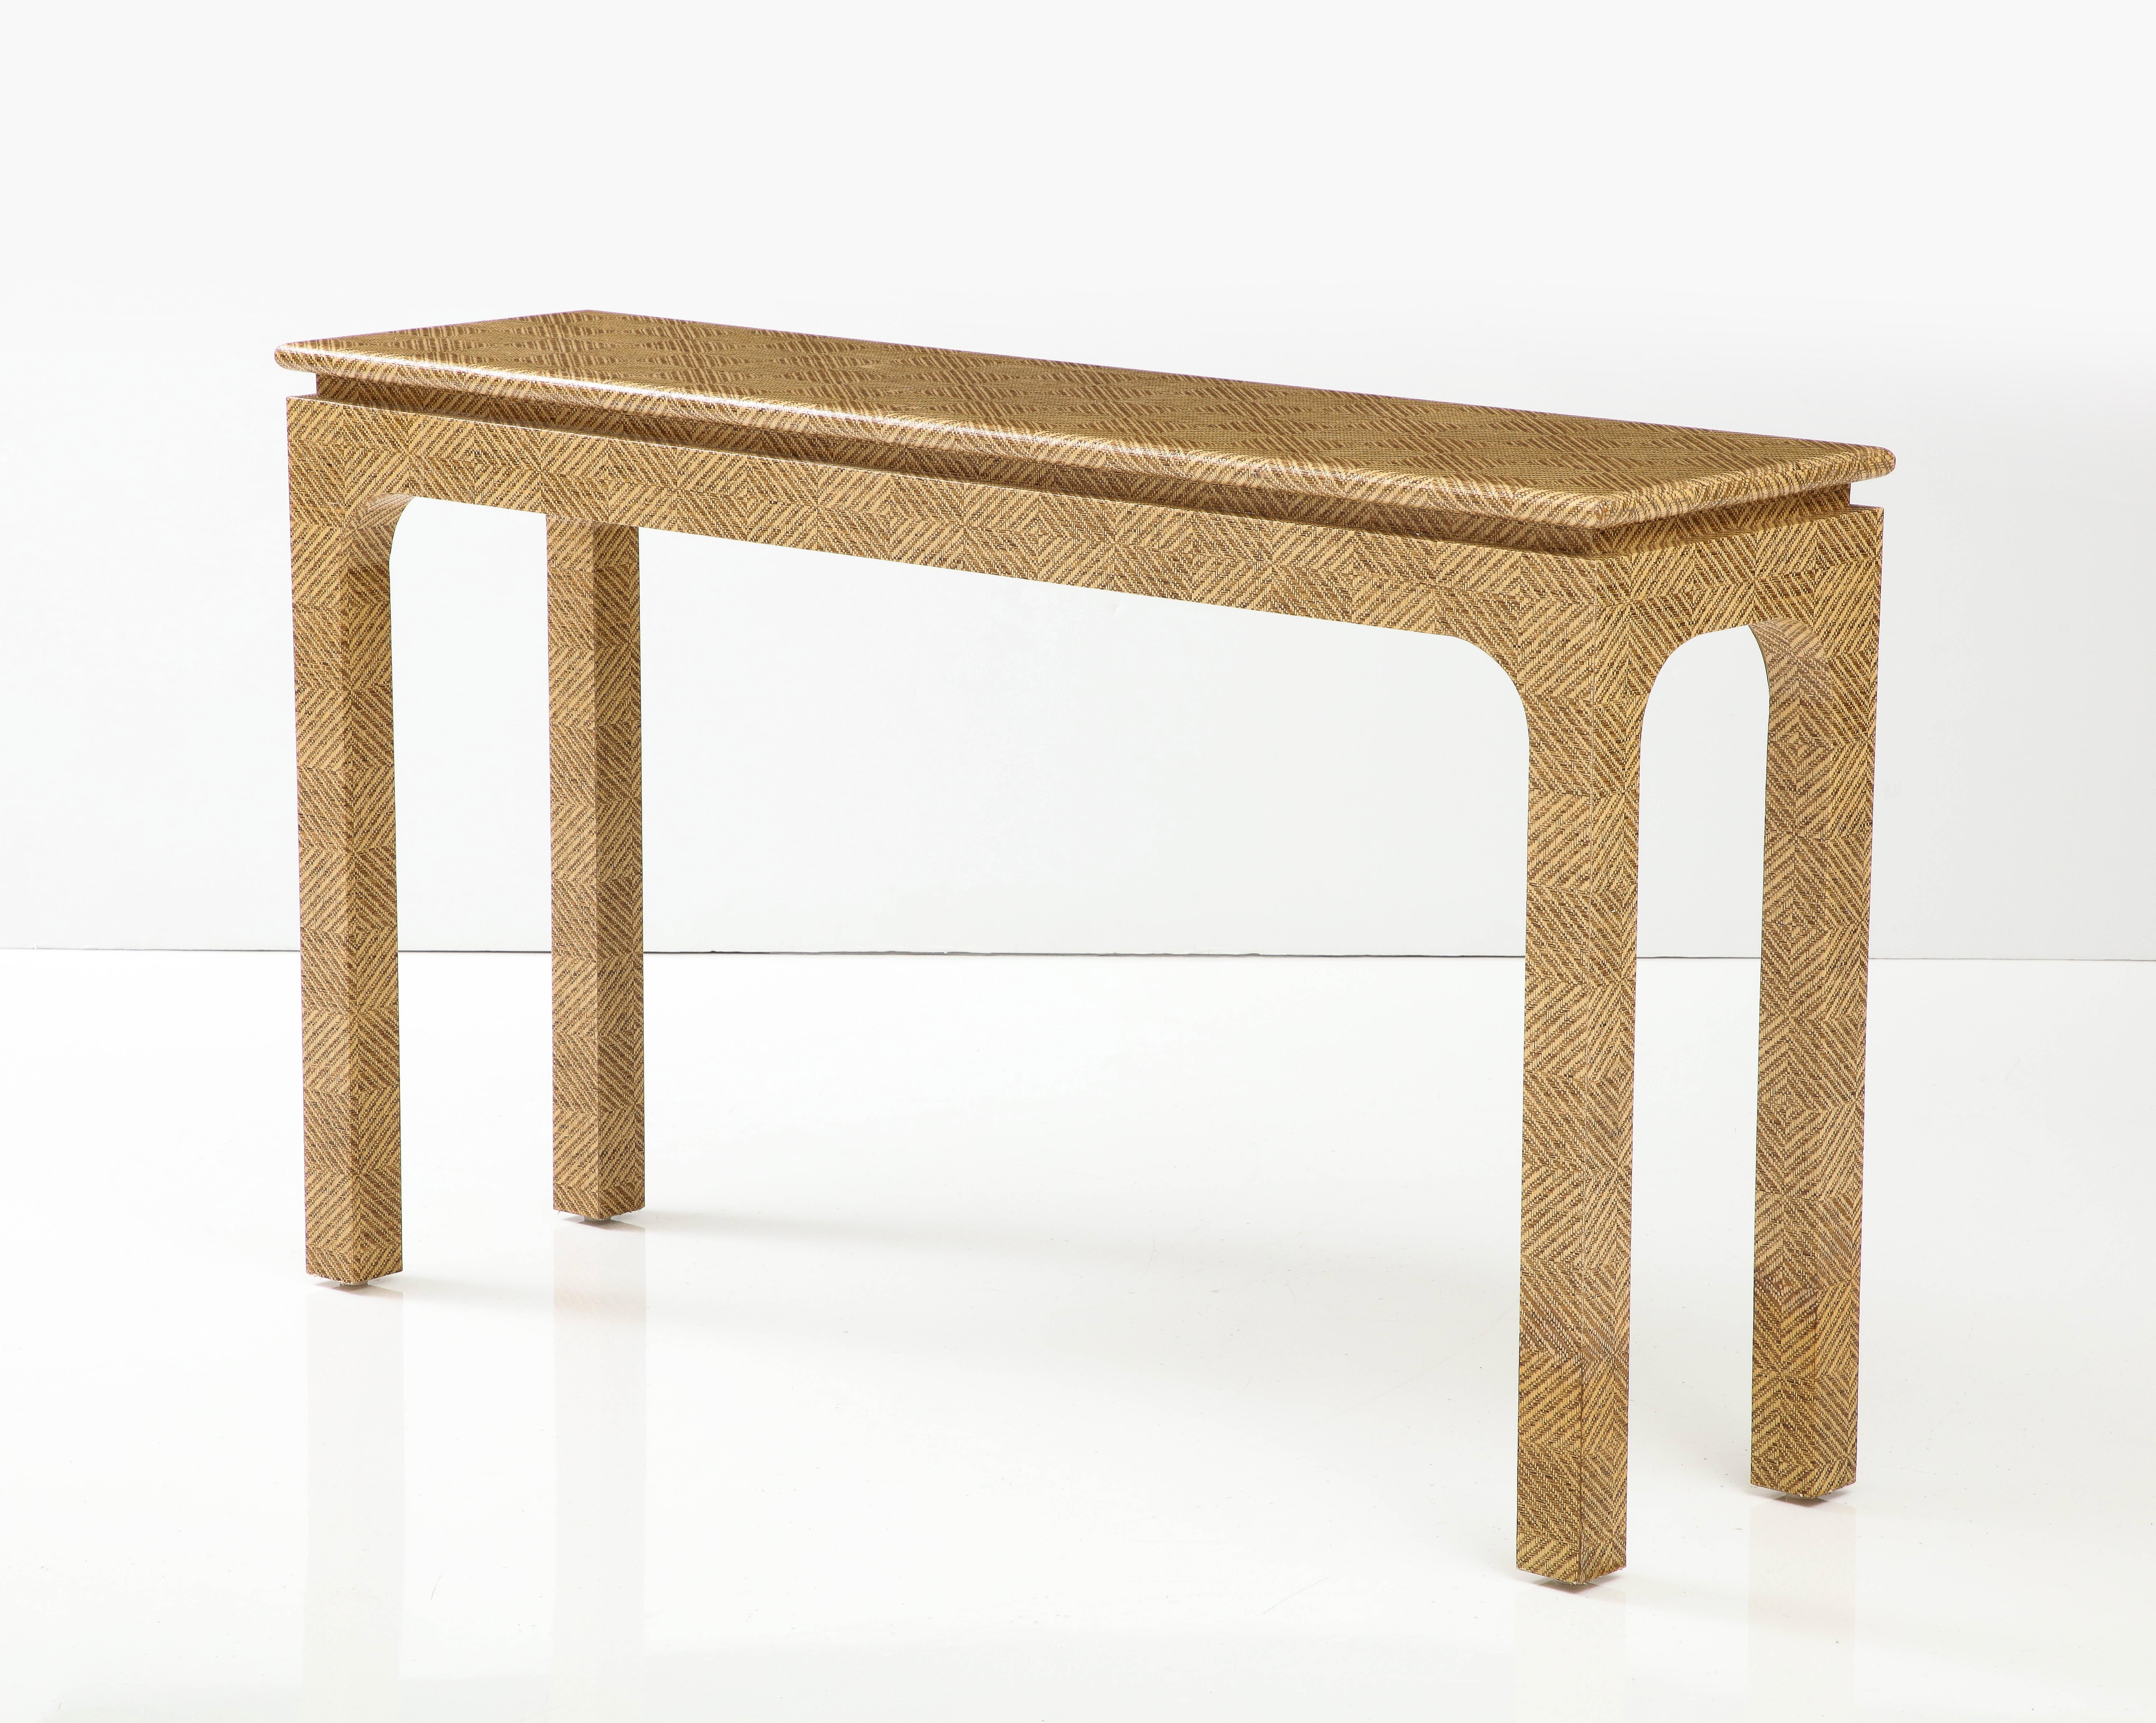 Mid - Century Modern Woven Raffia Console table by Harrison Van - Horn.
The table is in Great vintage condition.